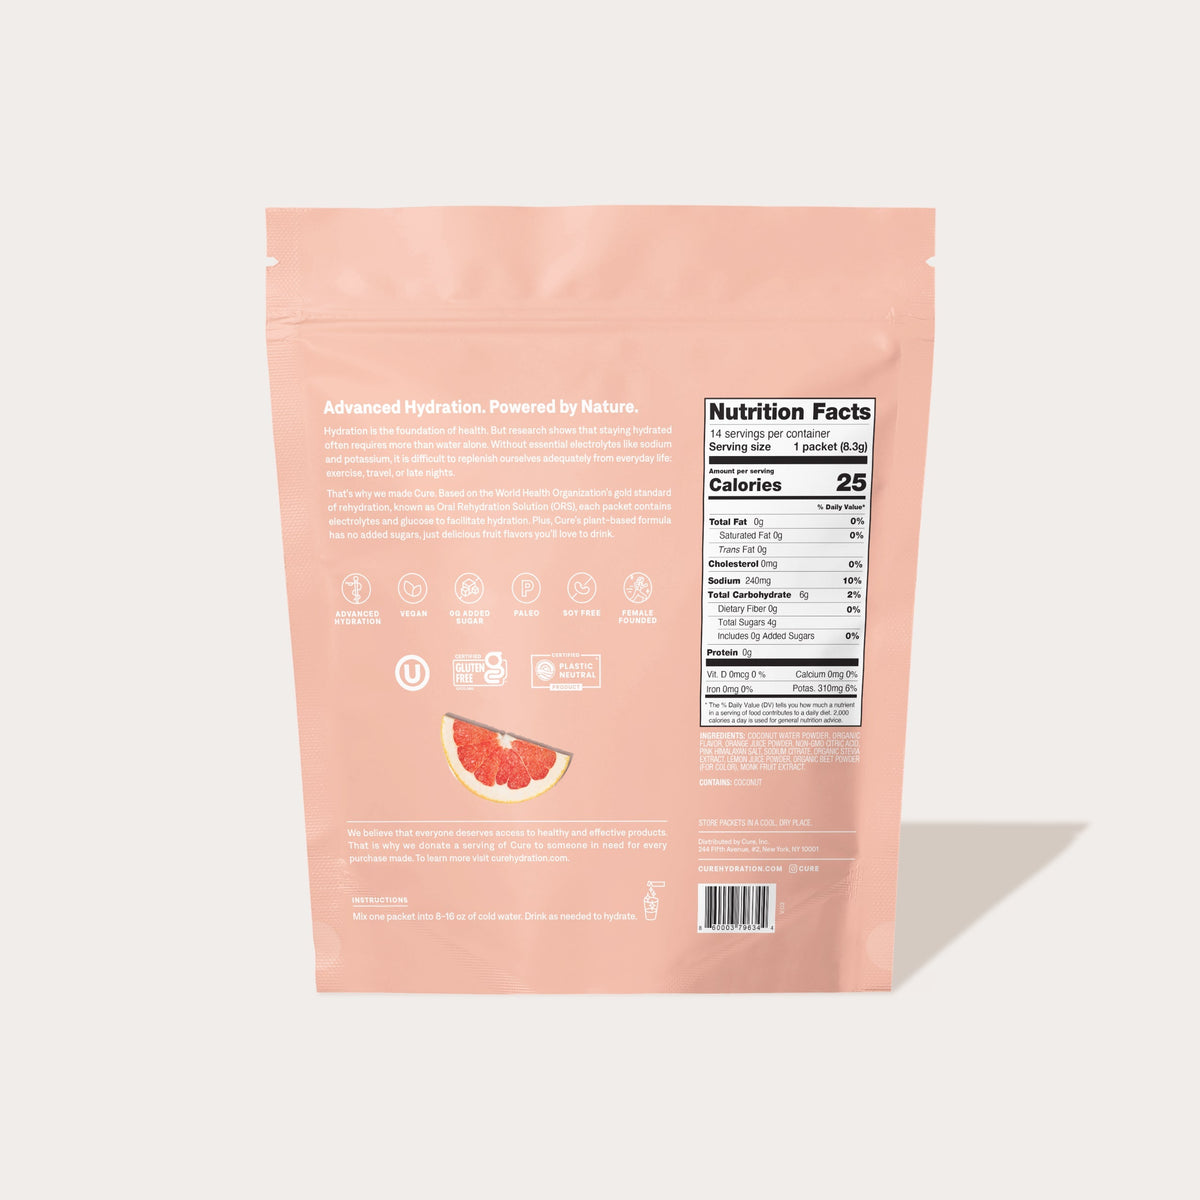 Grapefruit - Hydrating Electrolyte Drink Mix with no Added Sugar or Artificial Ingredients by Cure - Love